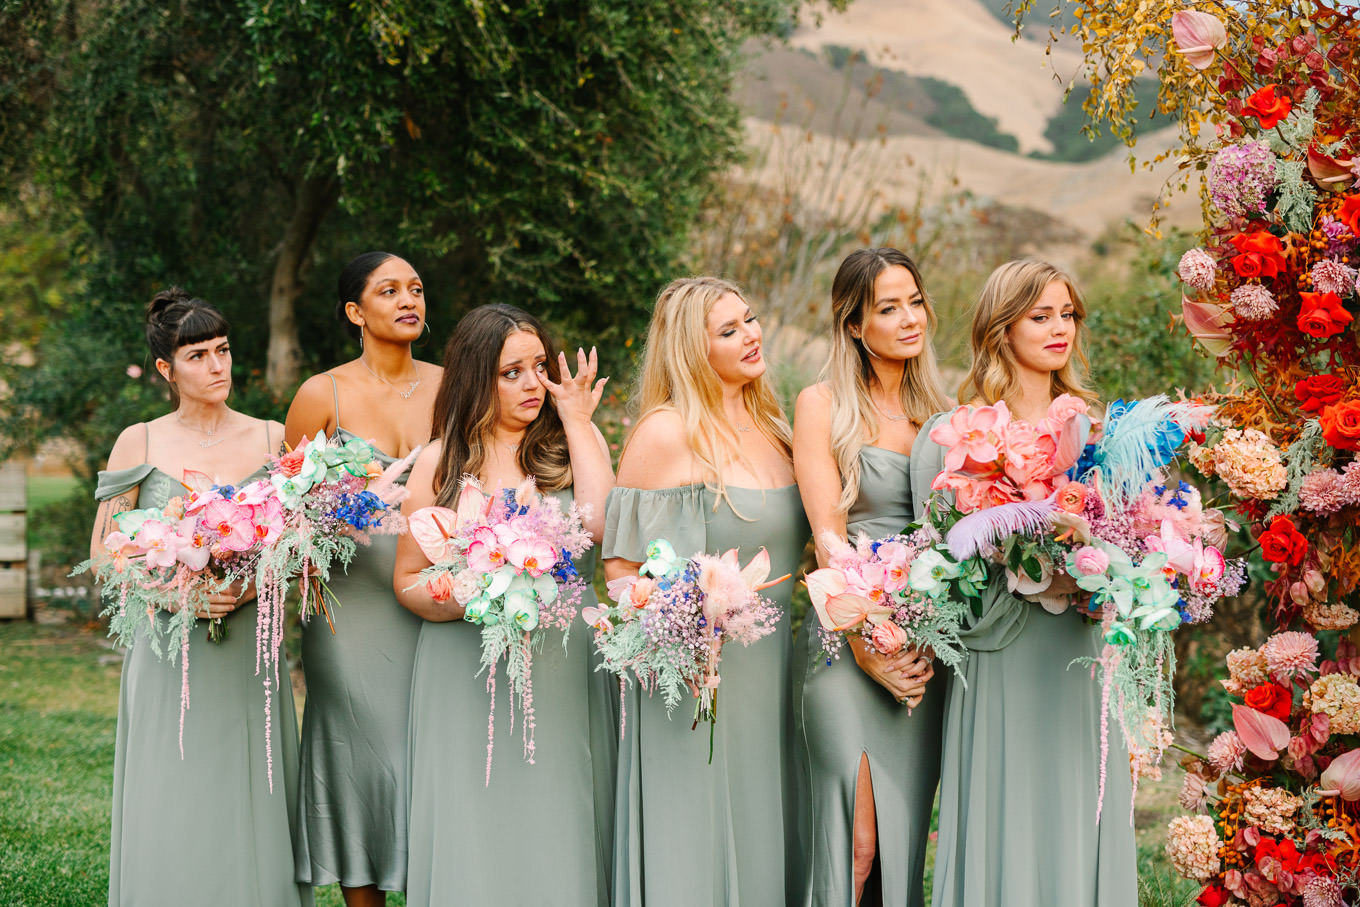 Bridesmaids crying | Colorful and quirky wedding at Higuera Ranch in San Luis Obispo | #sanluisobispowedding #californiawedding #higueraranch #madonnainn   Source: Mary Costa Photography | Los Angeles